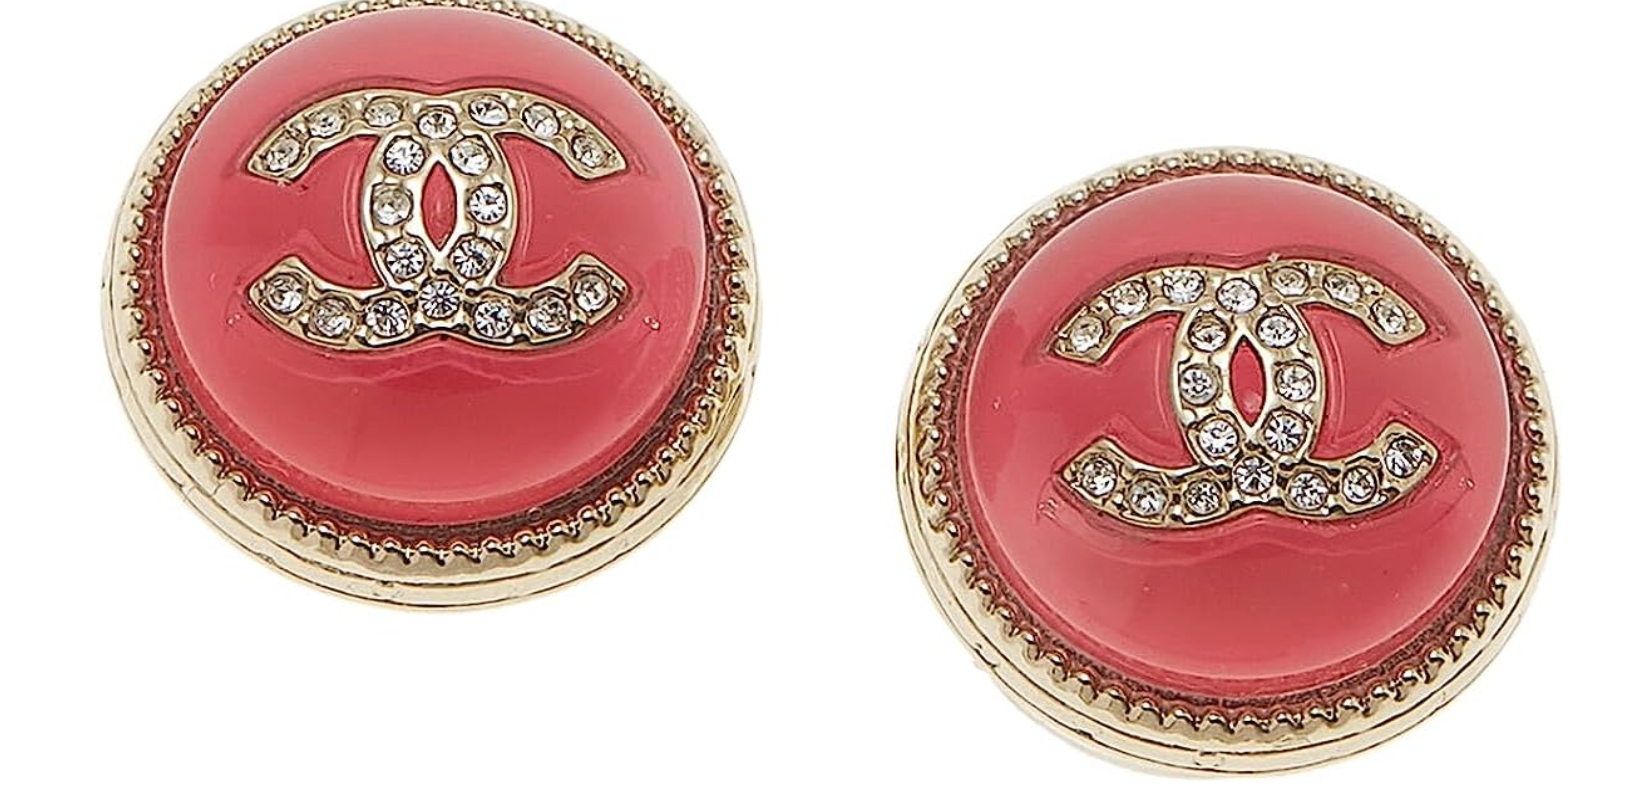 Chanel, Pre-Loved Pink Acrylic & Crystal 'CC' Earrings, Pink